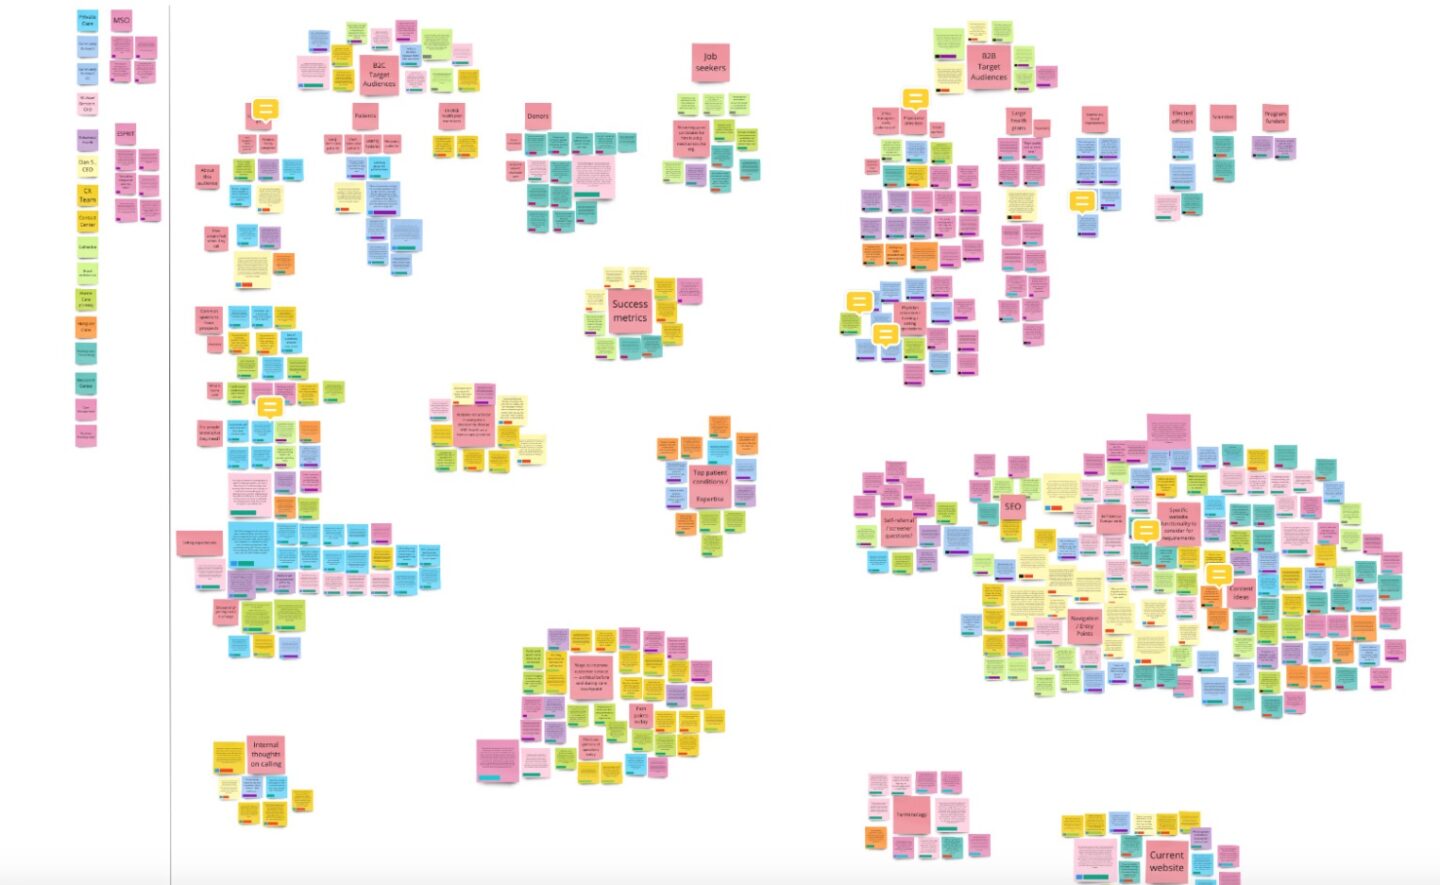 An affinity map from the app Miro featuring many sticky notes separated into clusters